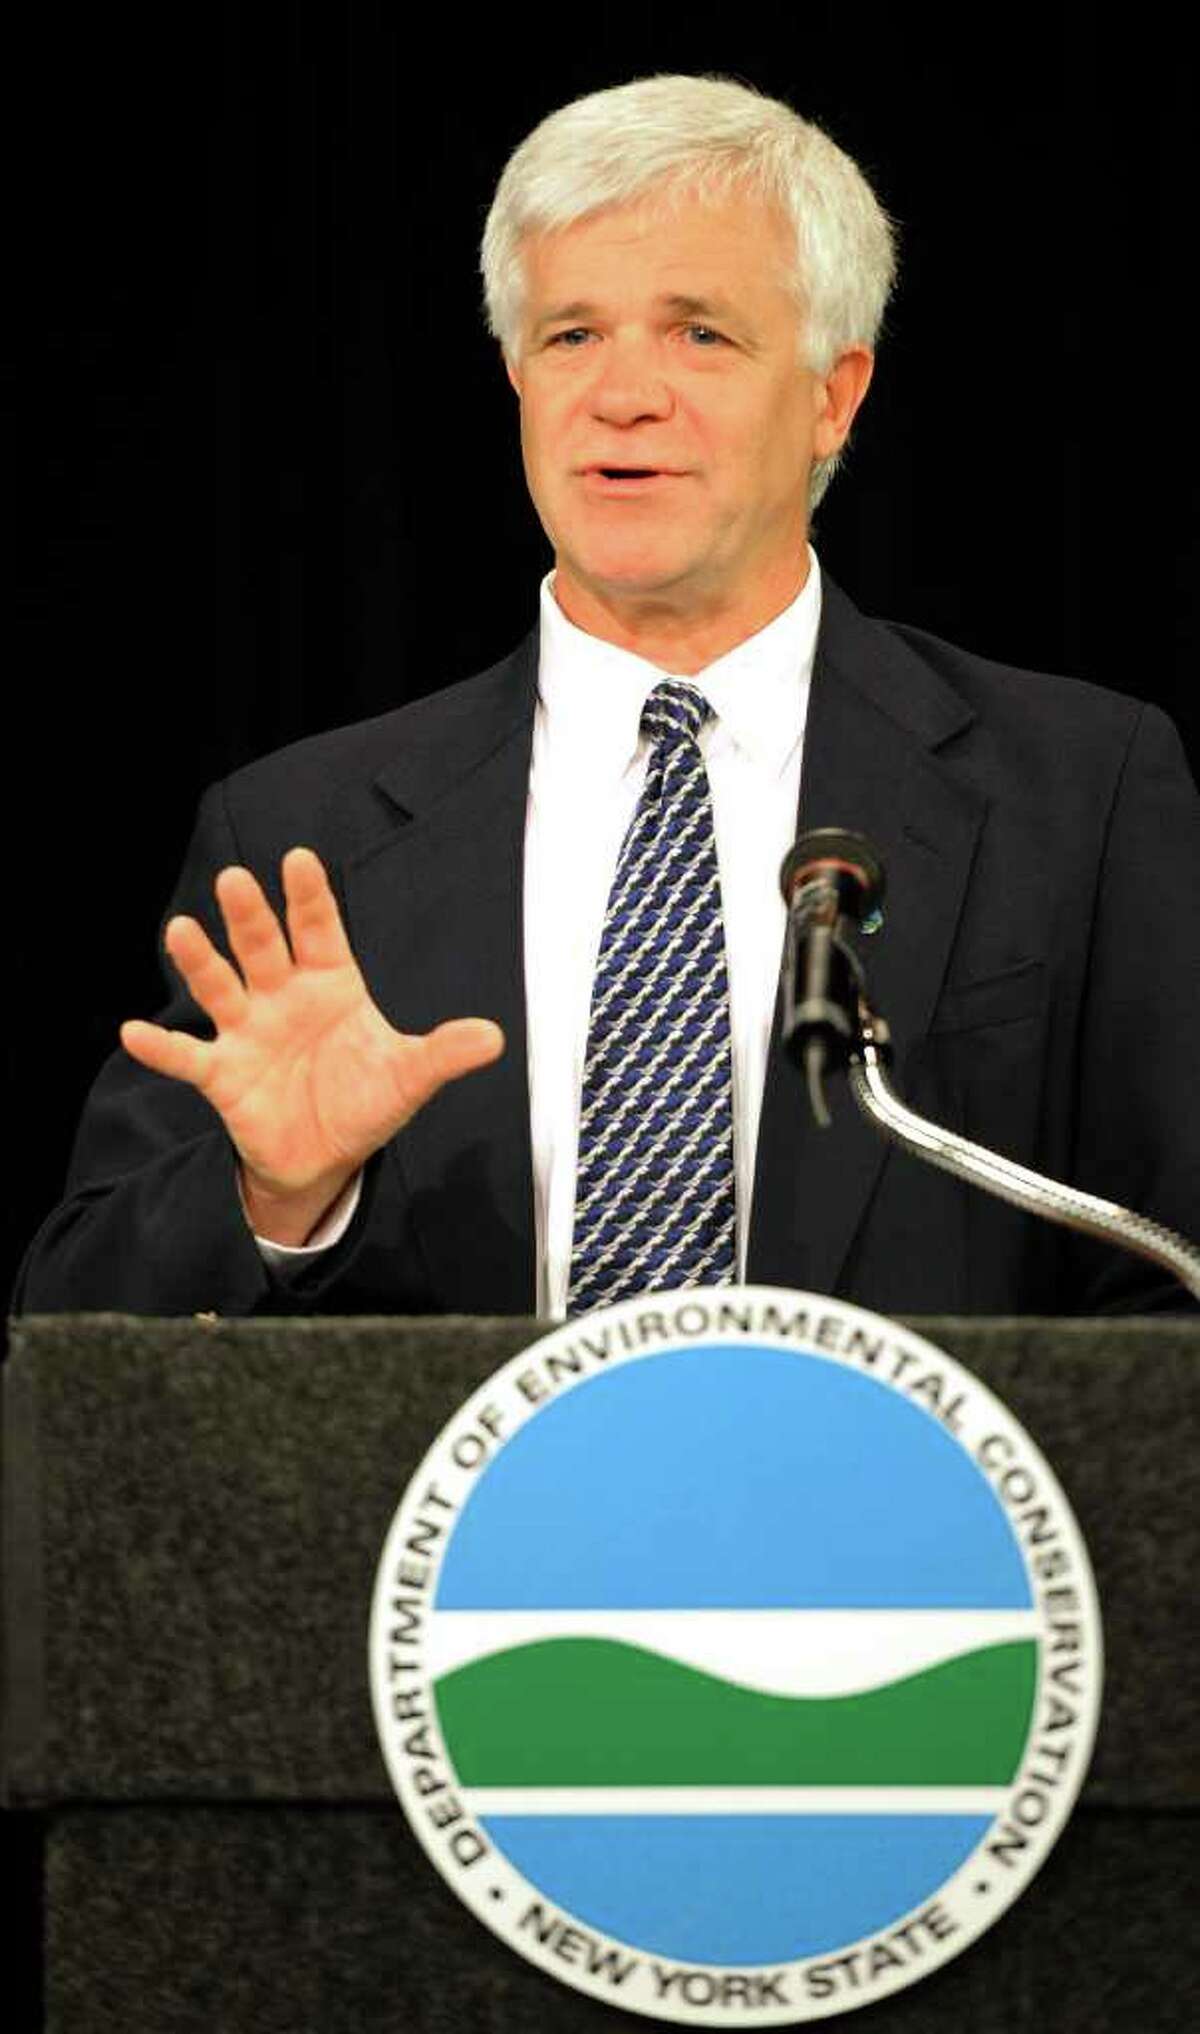 N.Y.S. Environmental Conservation Commissioner Joe Martens discusses his department's review of the High-Volume Hydraulic Fracturing process used in the natural gas drilling industry which will directly impact this state's distribution of permits for this process at a press briefing in Albany, N.Y. July 1, 2011. (Skip Dickstein / Times Union)